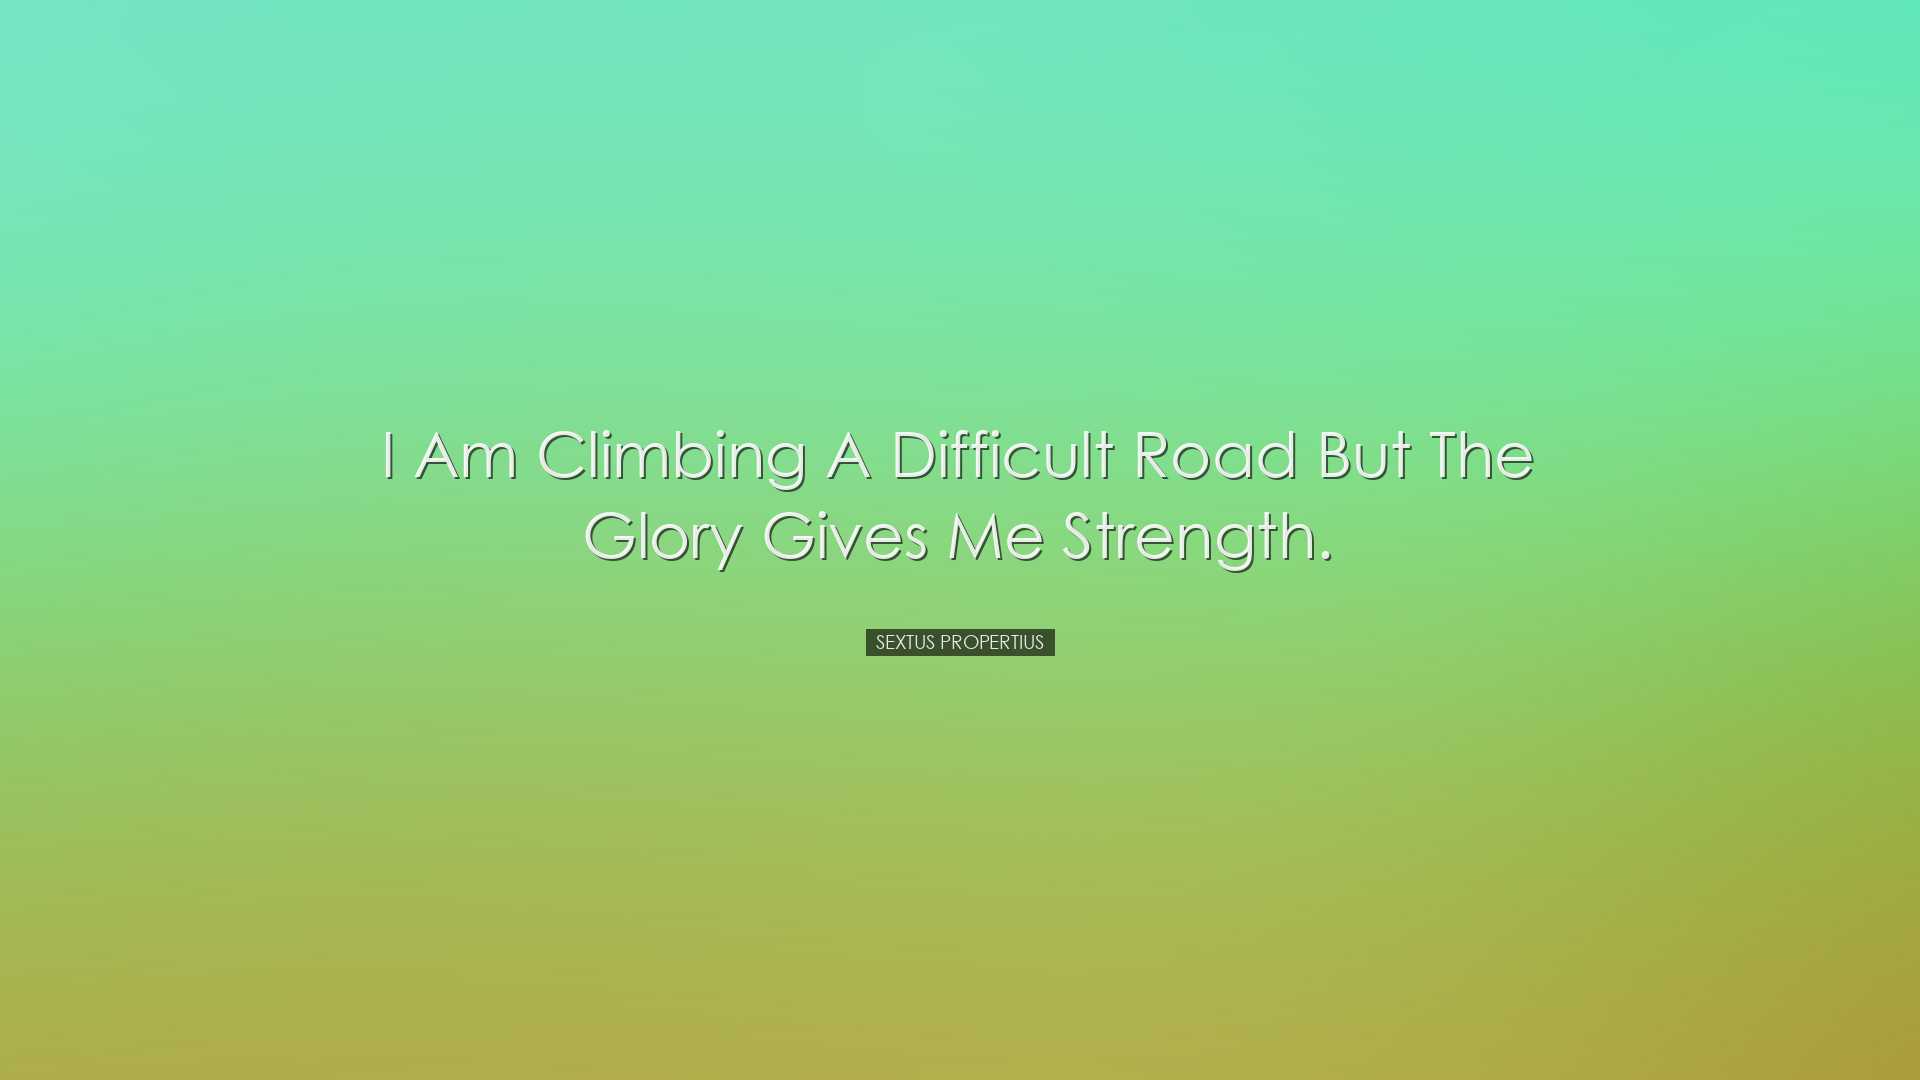 I am climbing a difficult road but the glory gives me strength. -